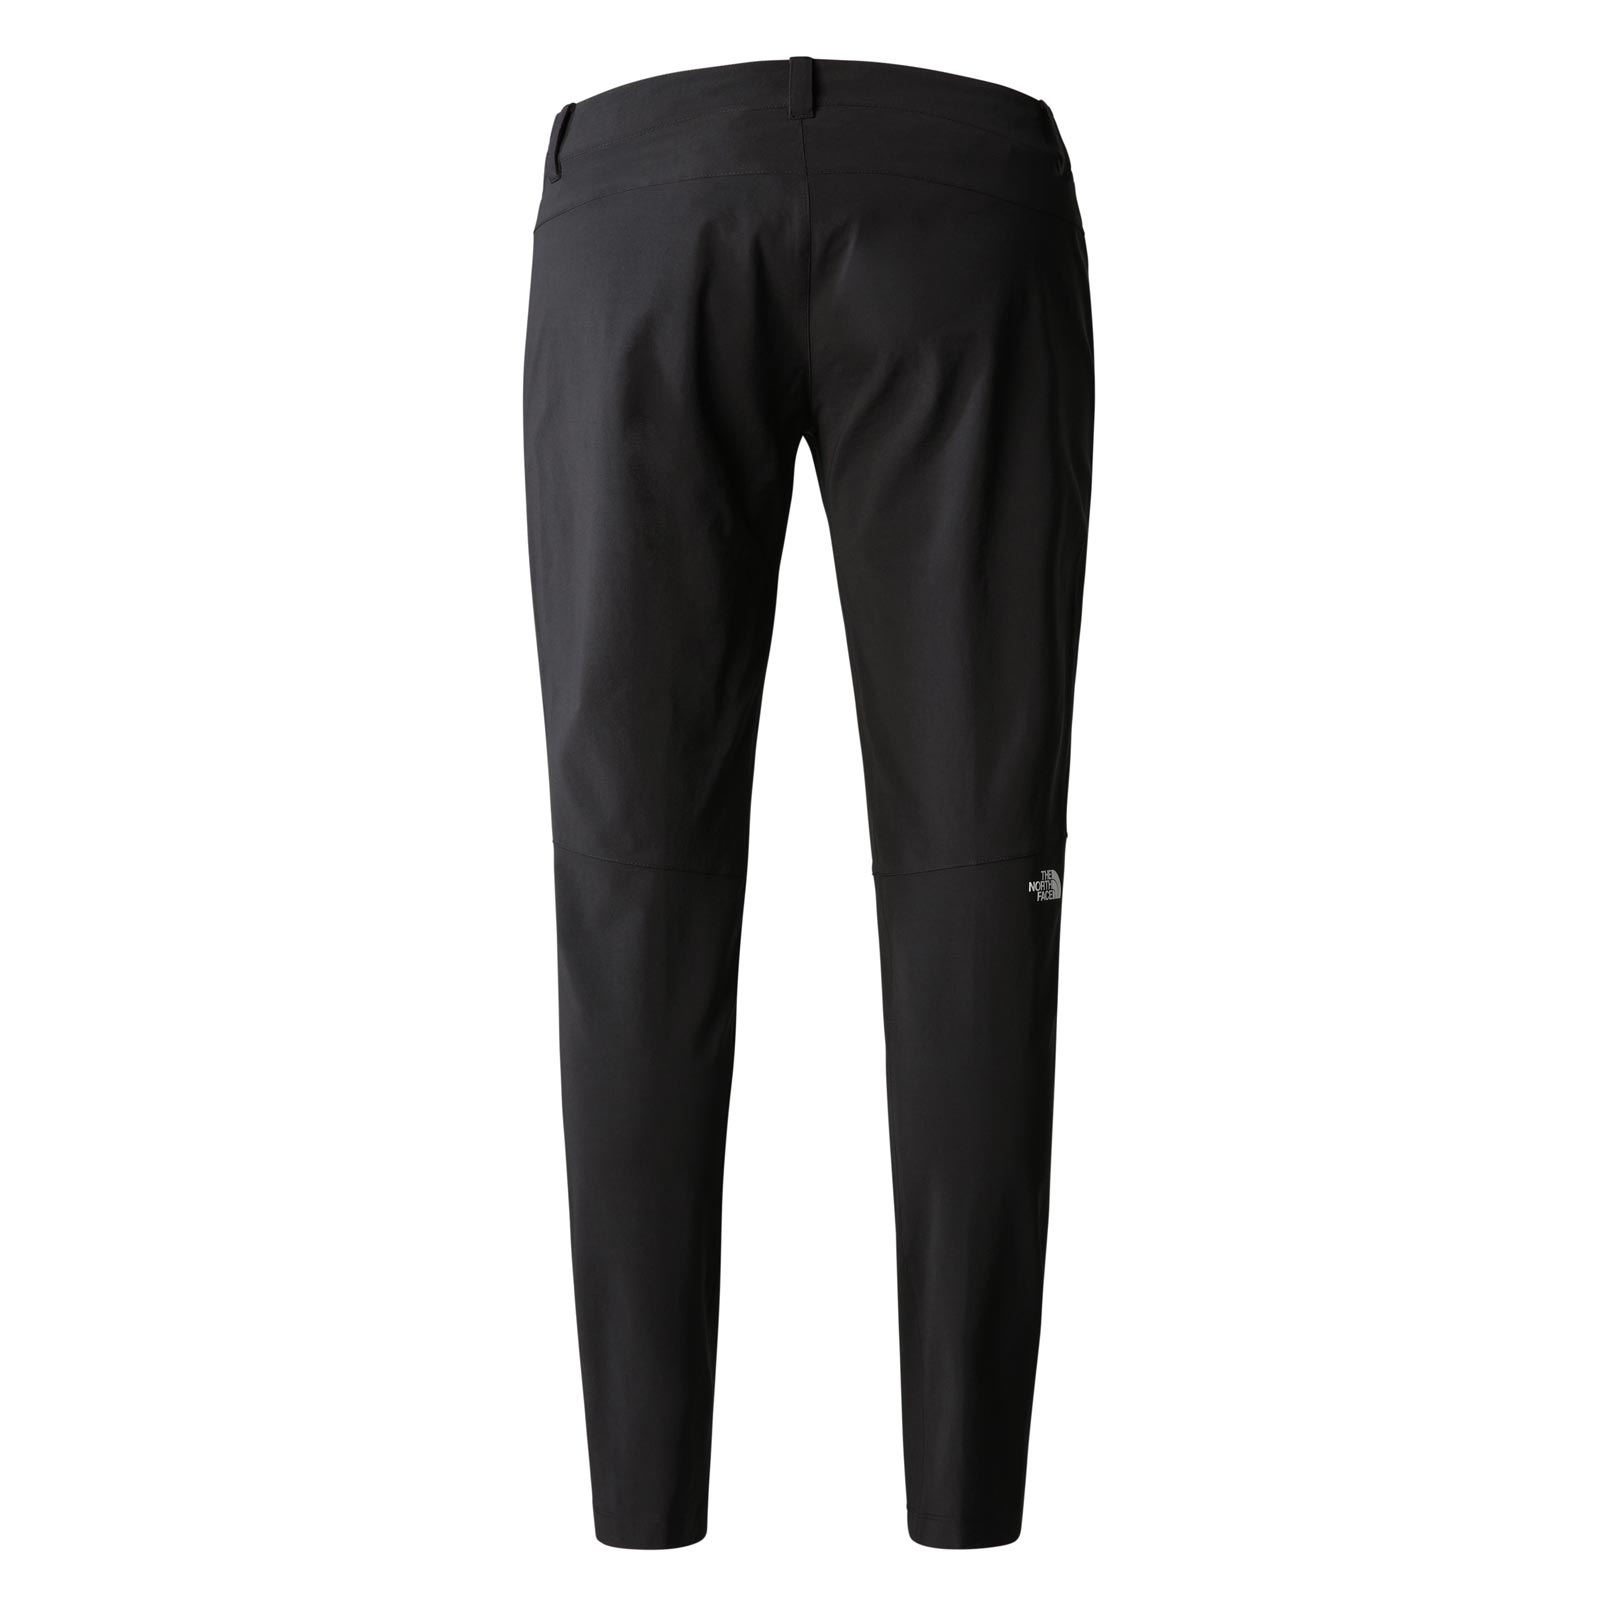 THE NORTH FACE EXTENT III MENS HIKING PANTS  